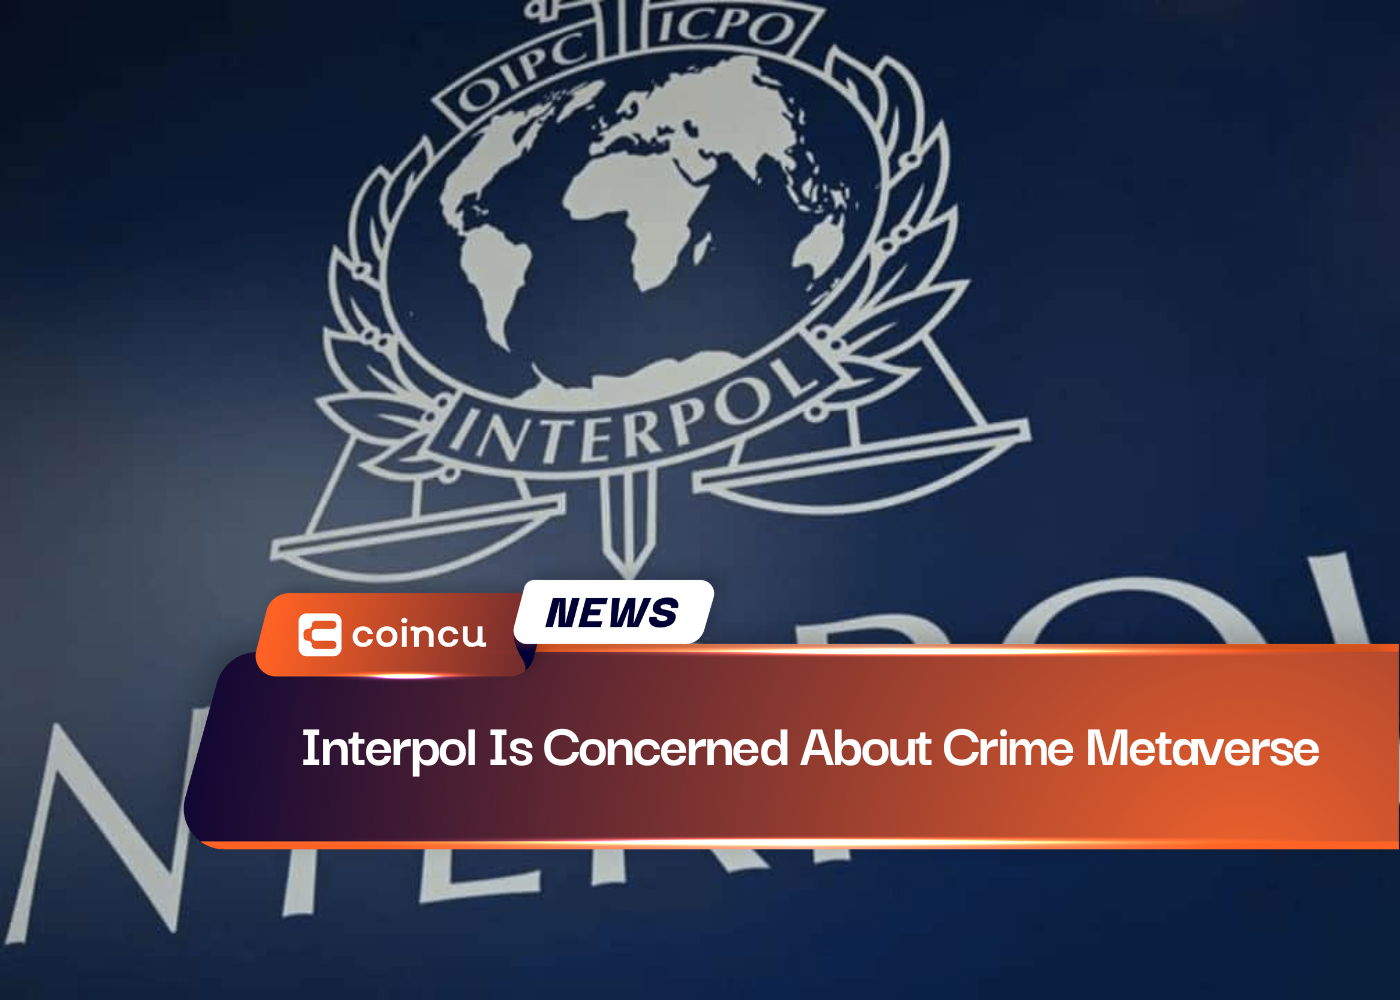 Interpol Is Concerned About Crime Metaverse